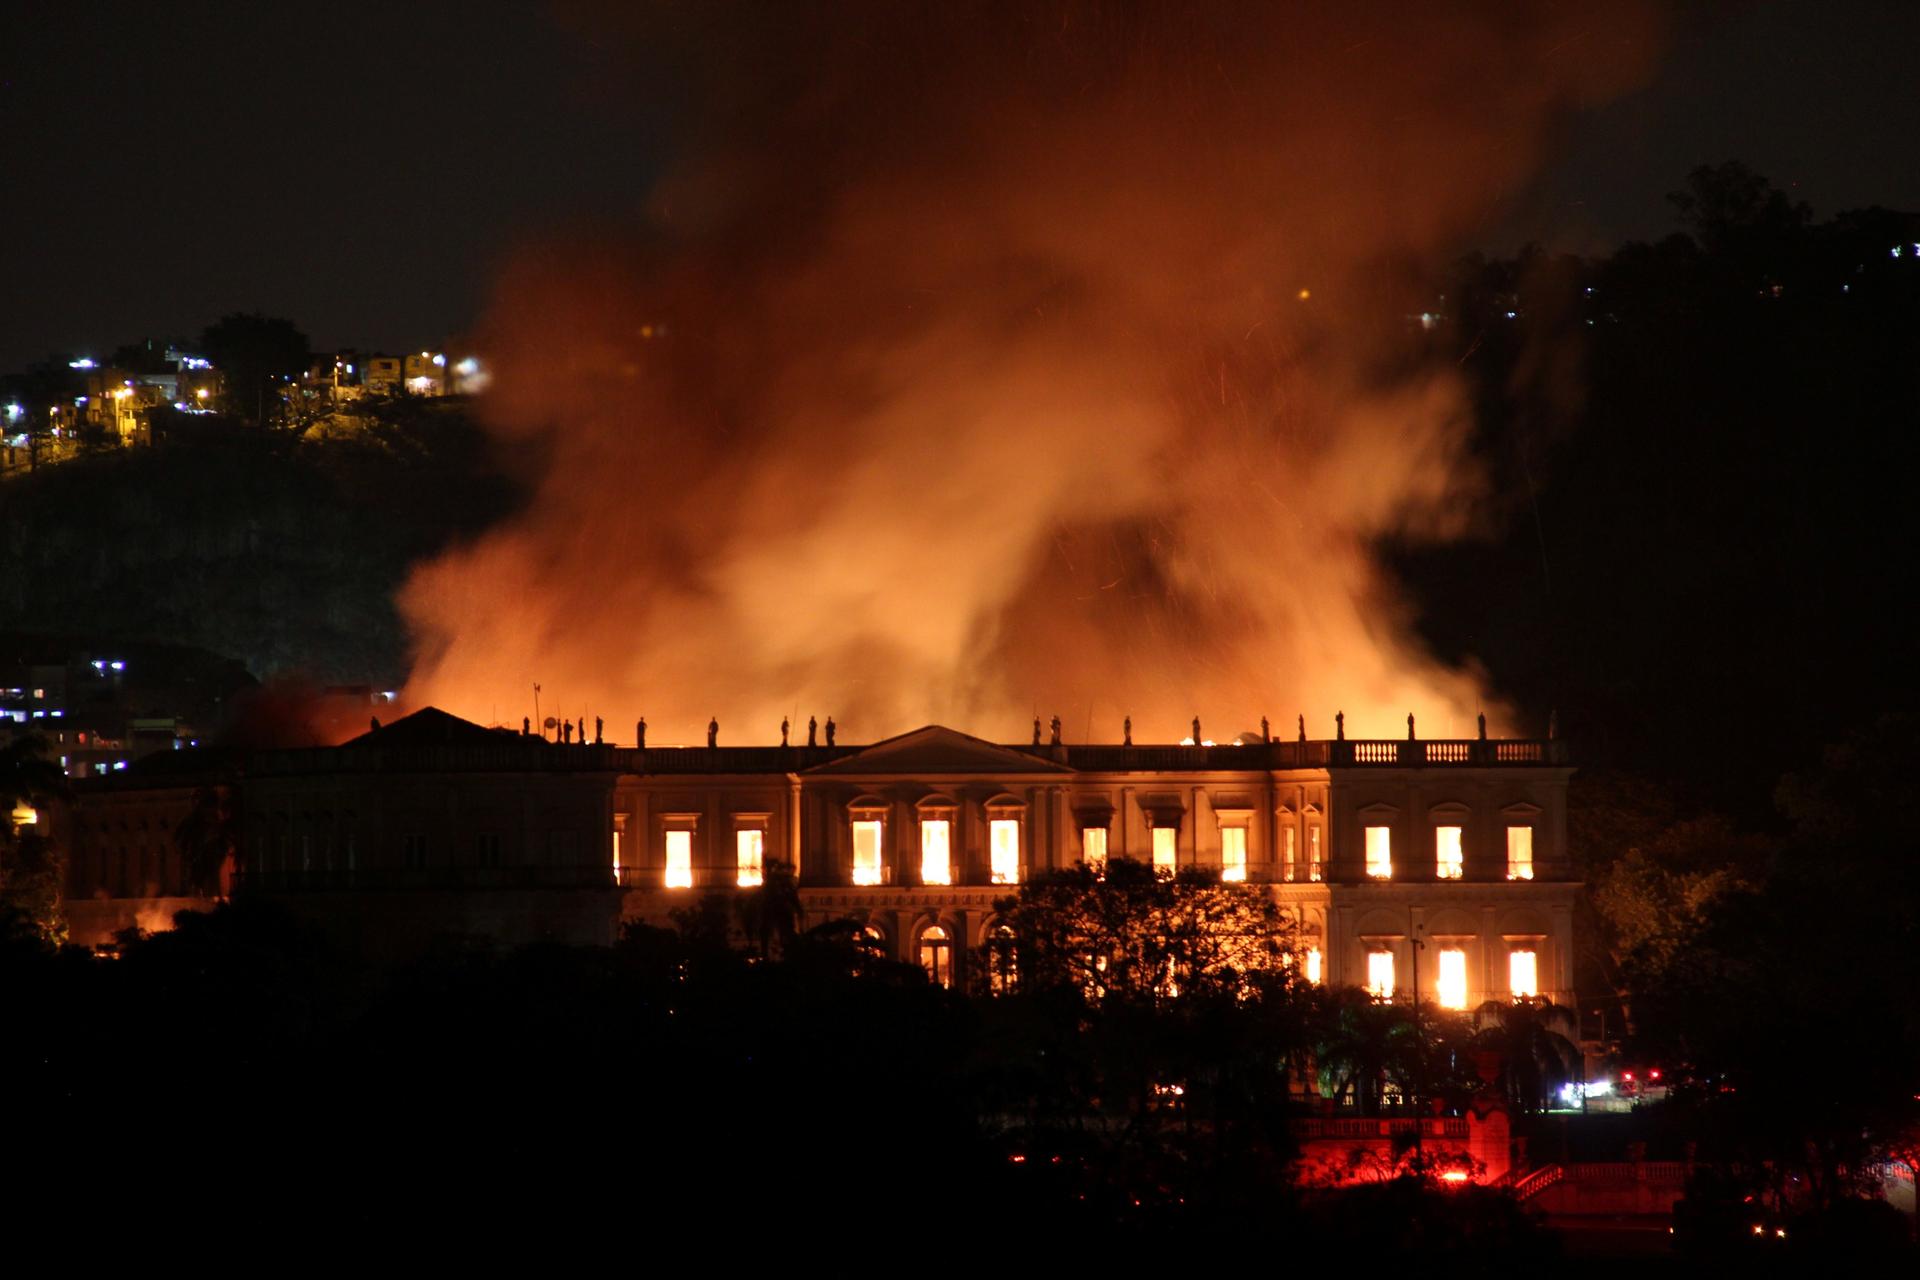 A fire burns at the National Museum of Brazil.